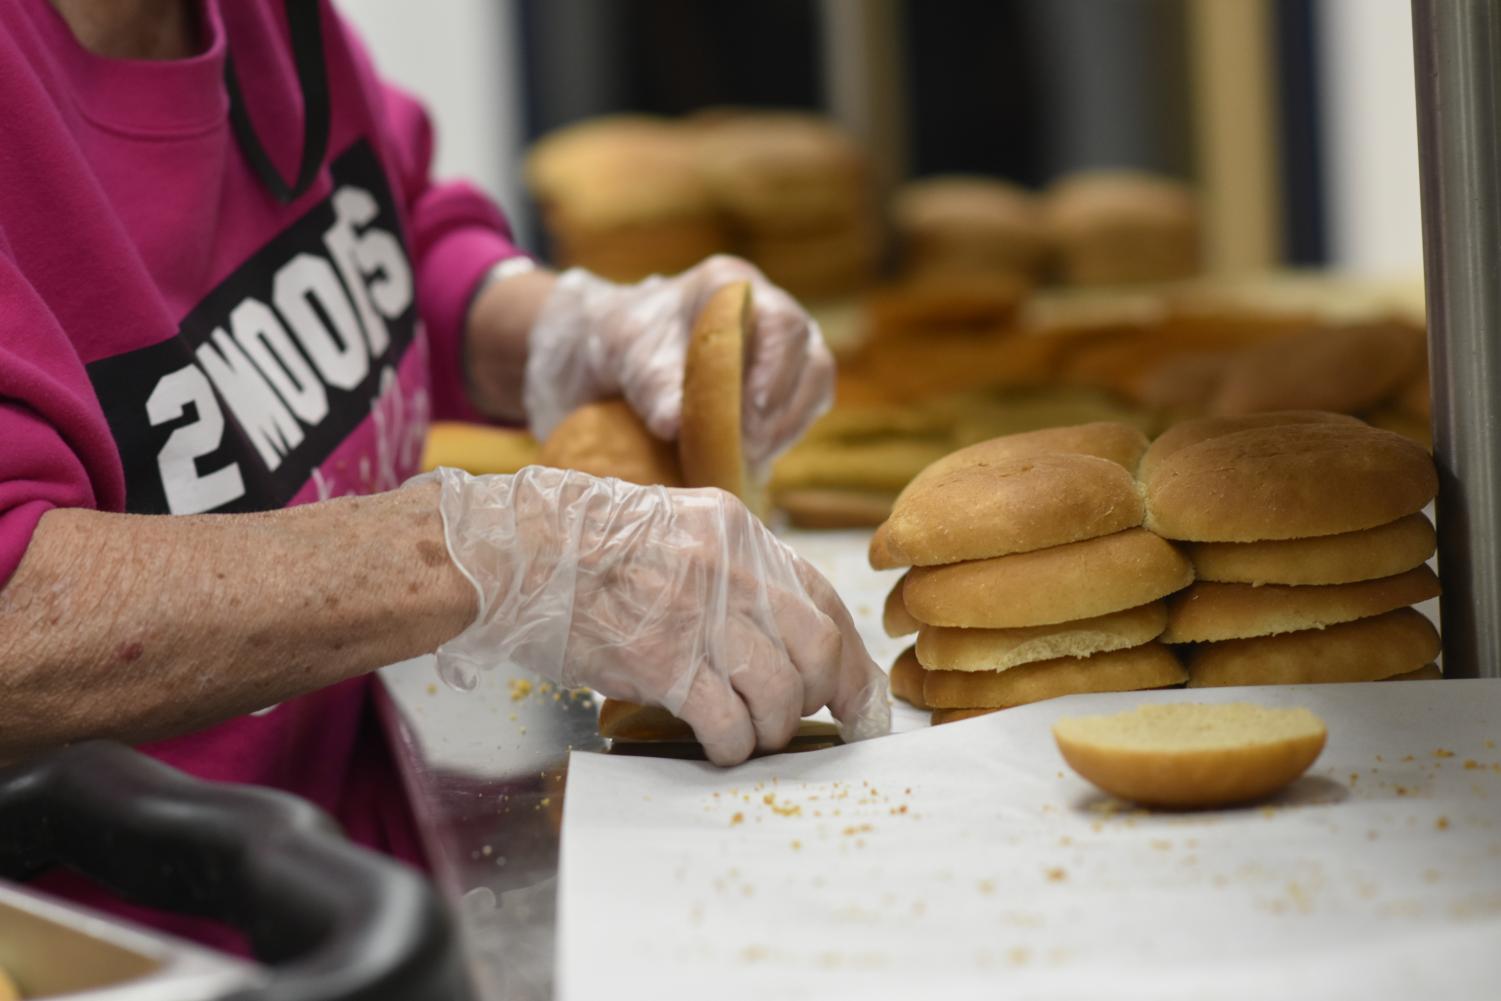 Kitchen staff member Mary Gaspard prepares sandwiches before lunch